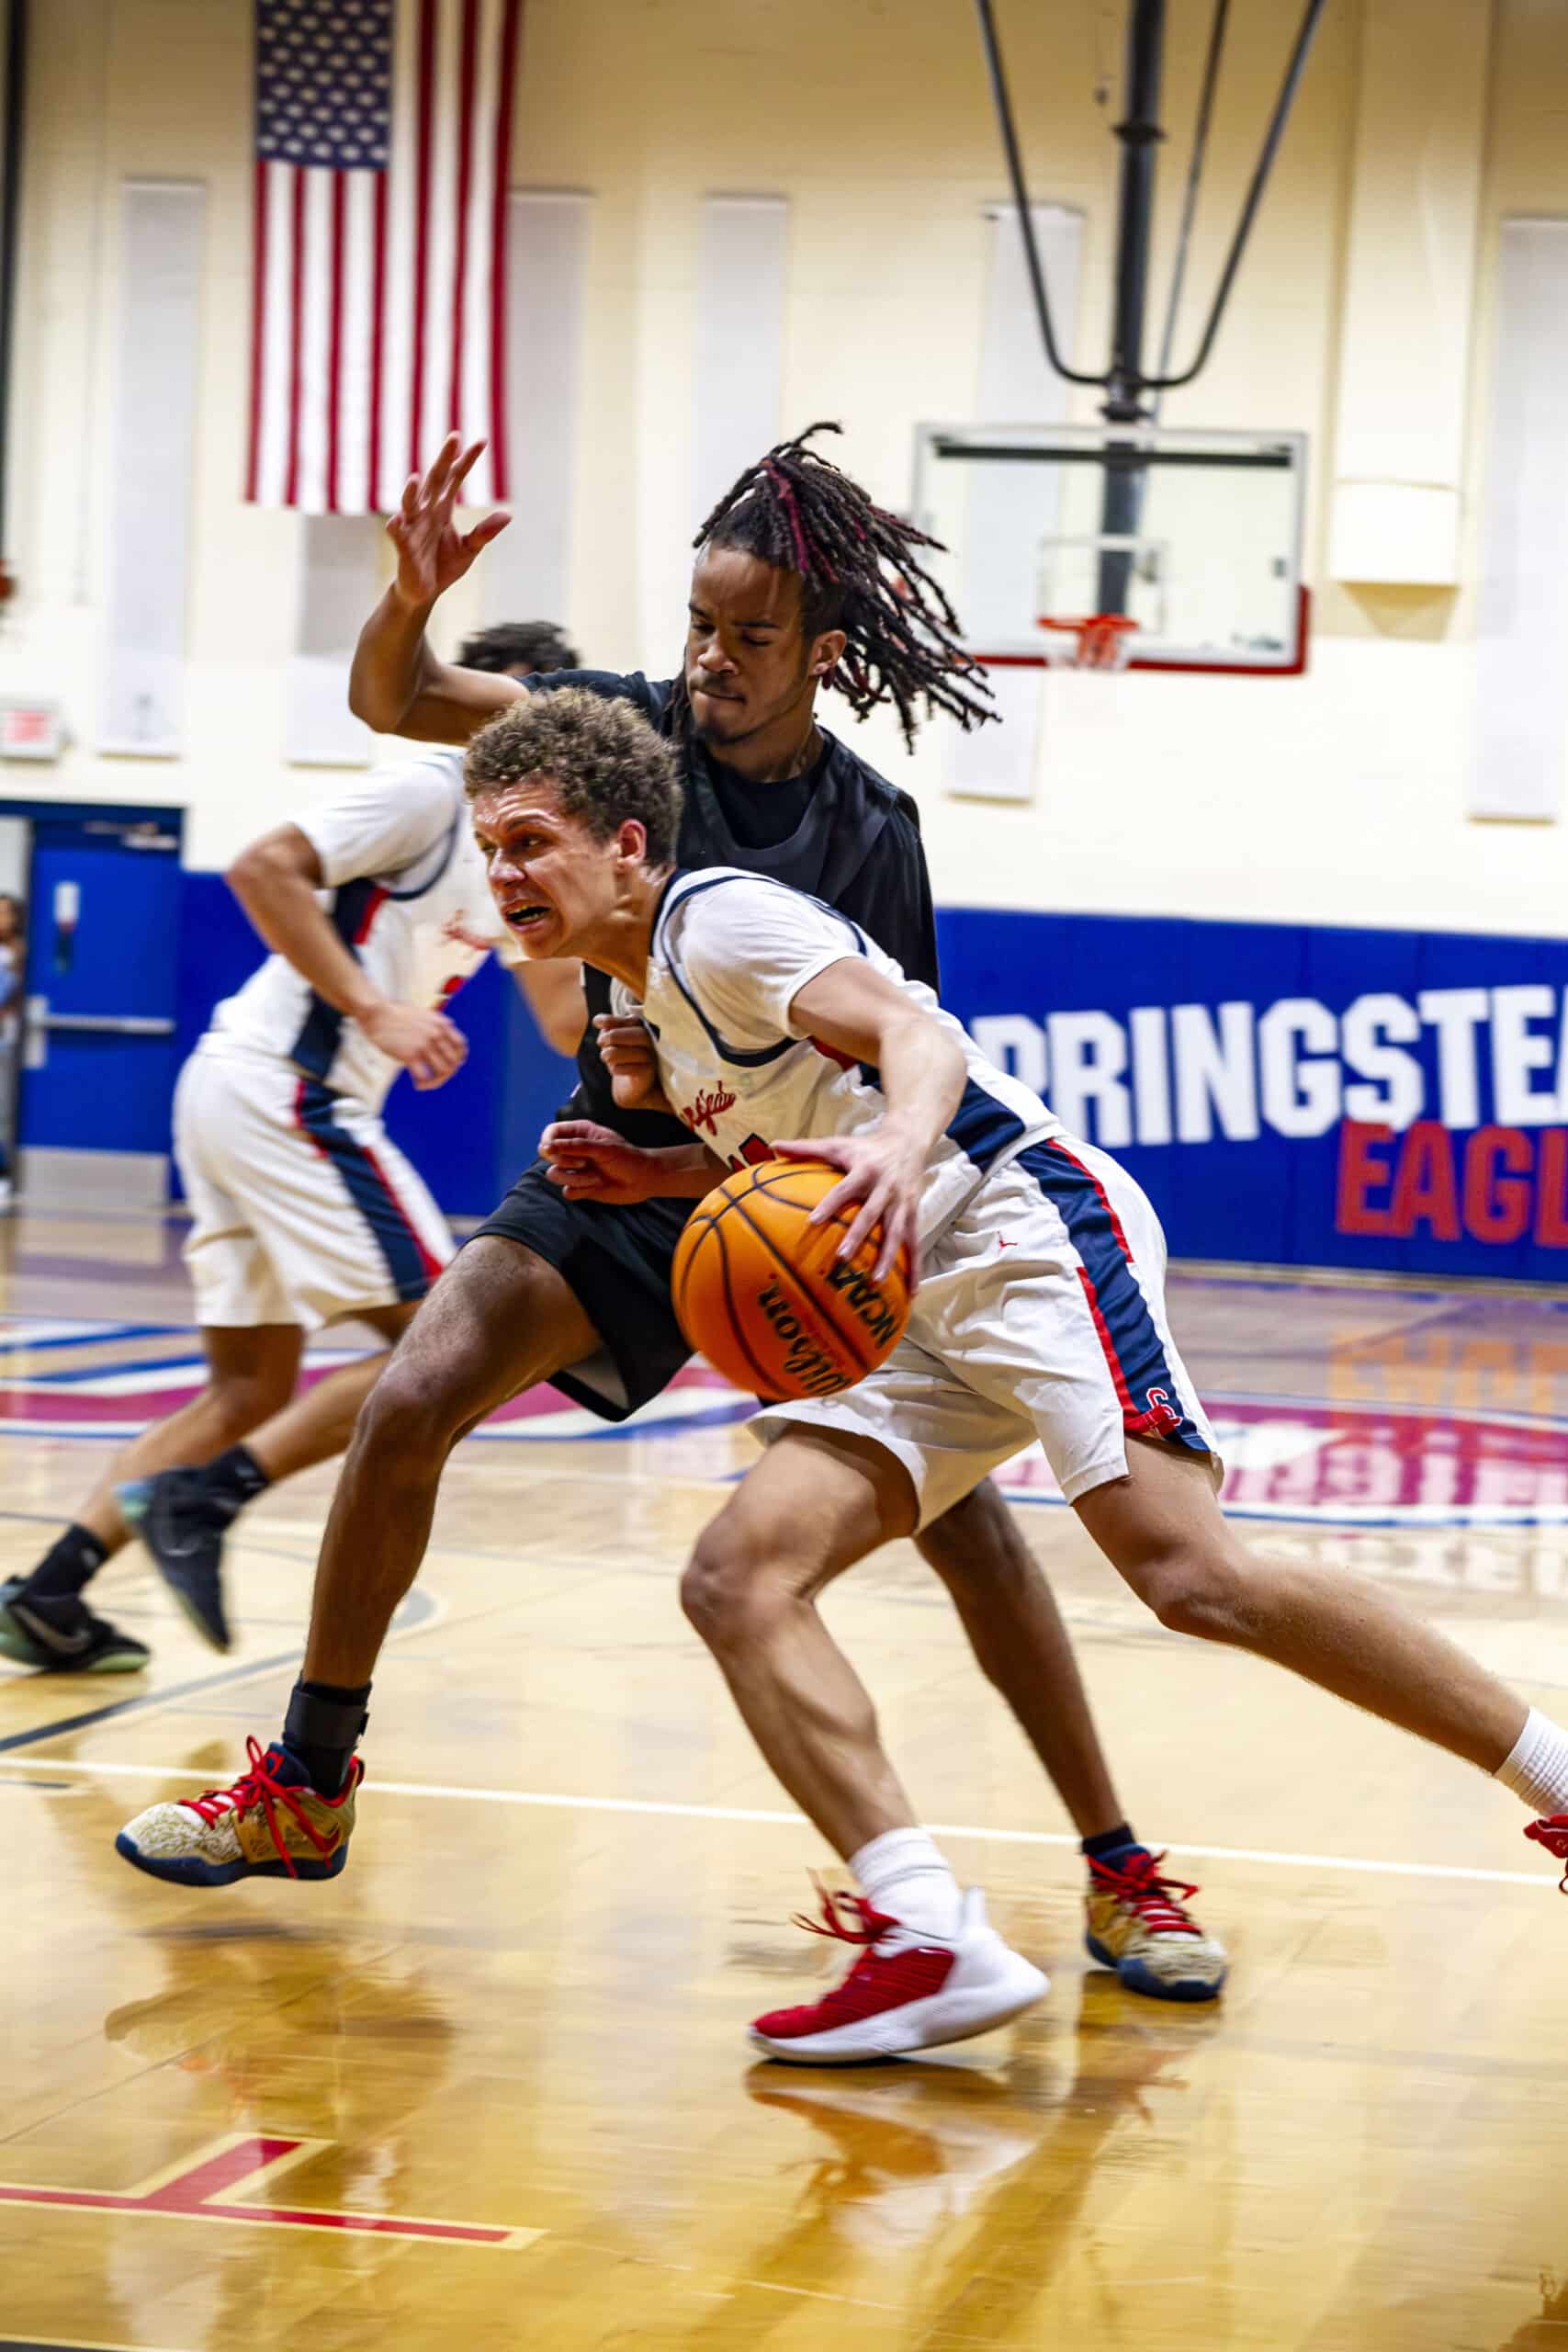 Springstead's Austin Nicholson driving the ball down the court. Photo by Hanna Maglio.